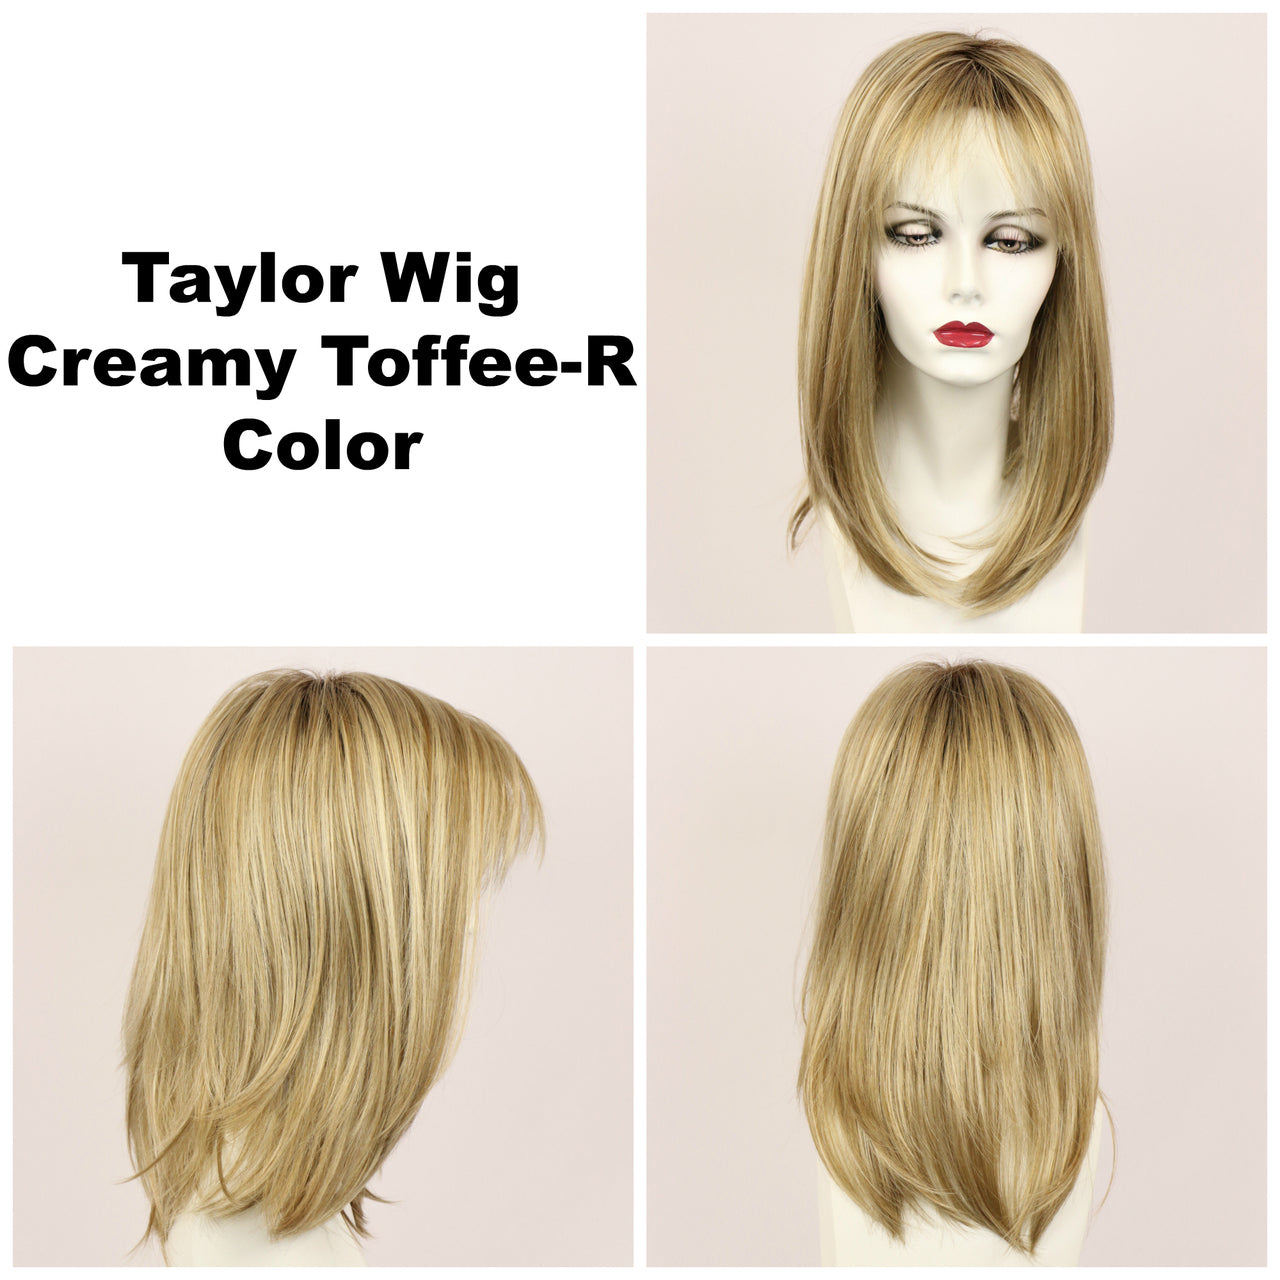 Creamy Toffee-R / Taylor w/ Roots / Long Wig